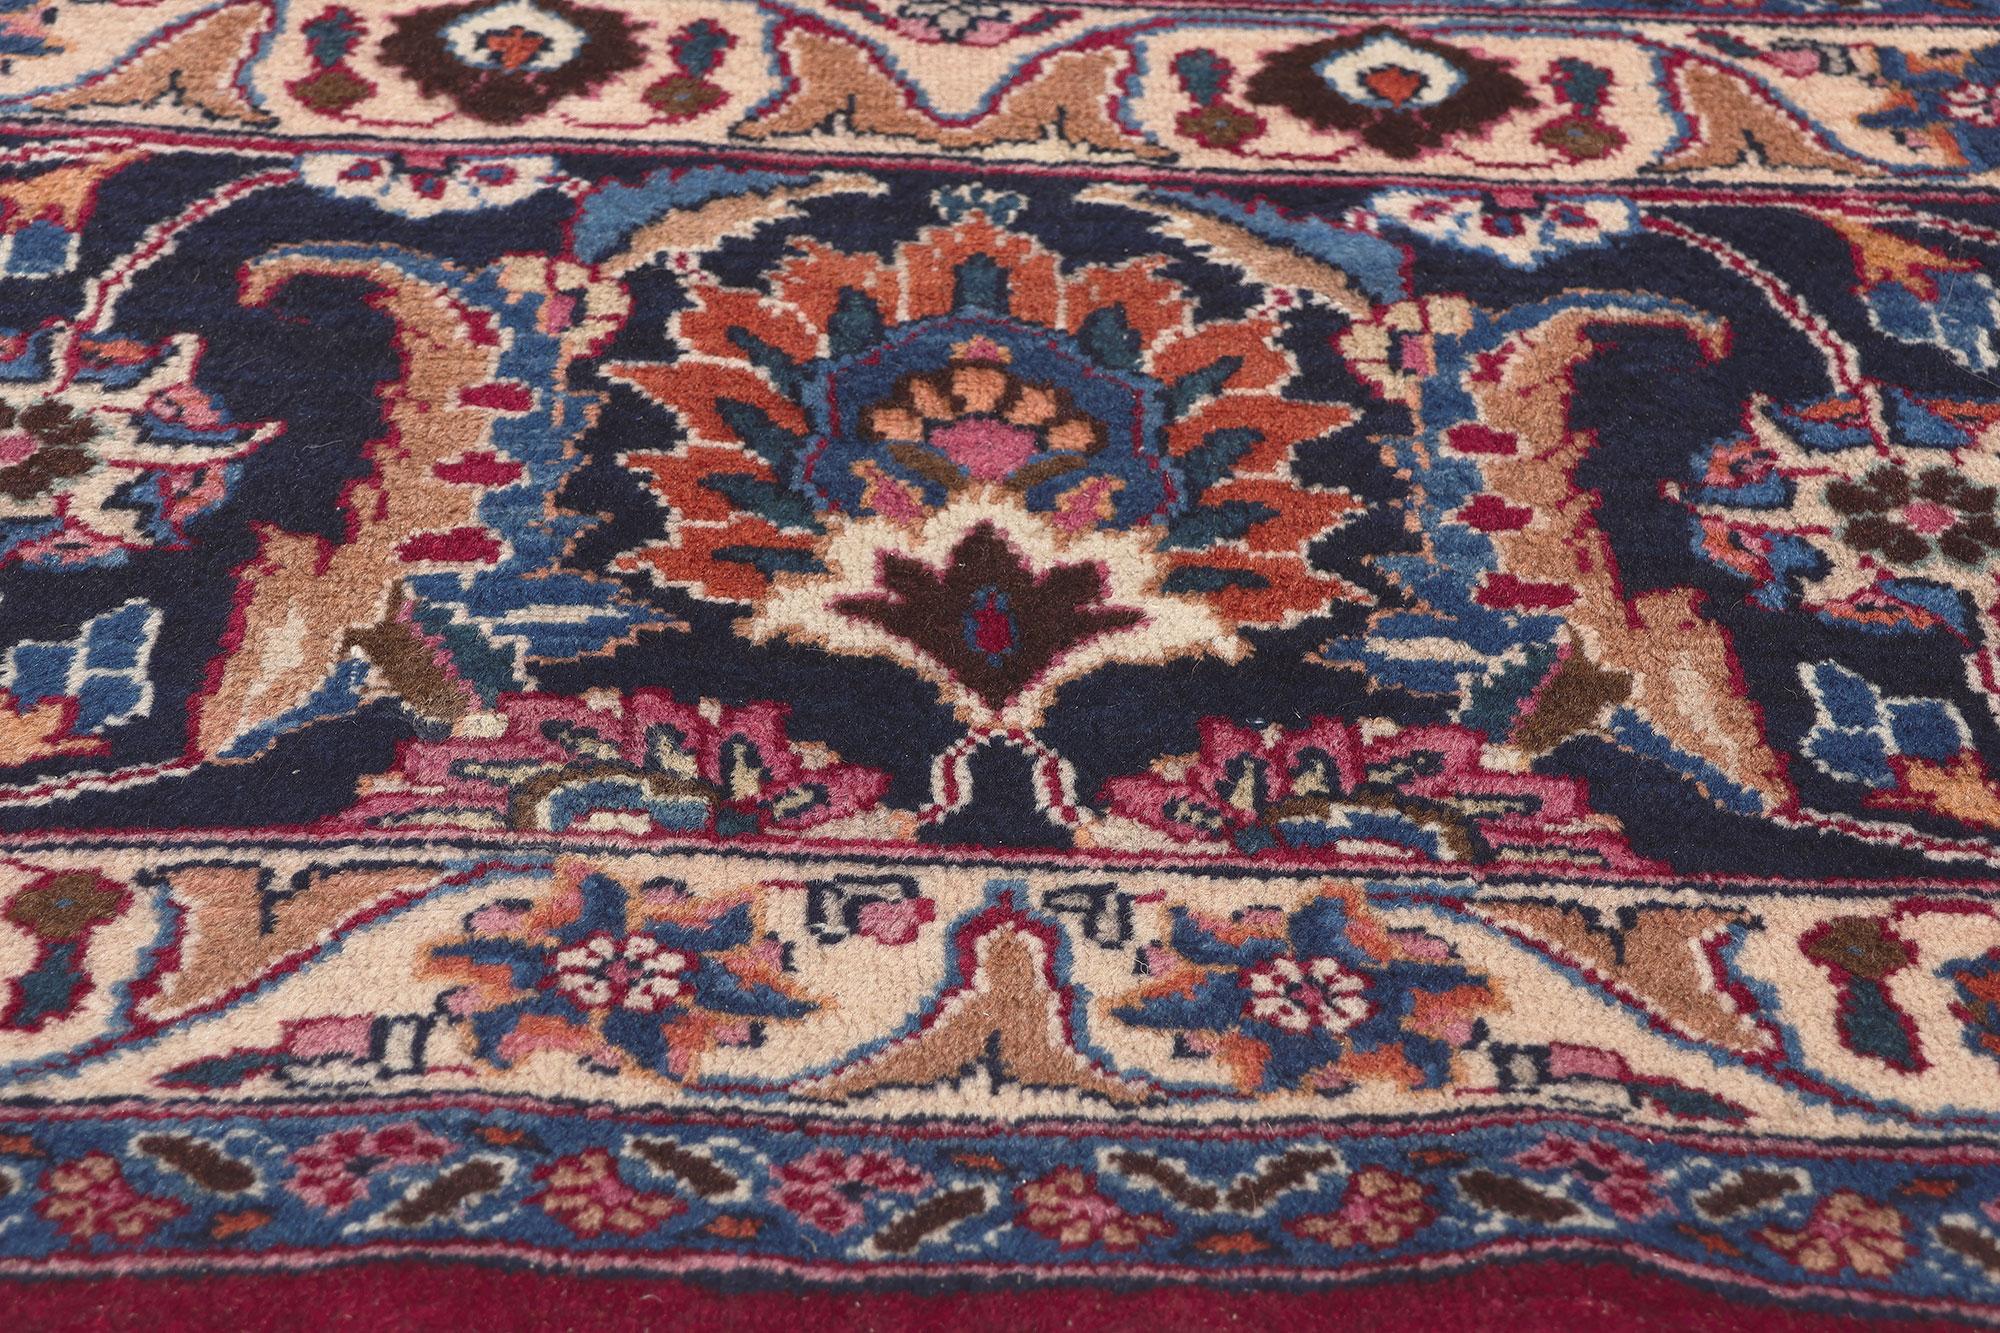 Antique Persian Mashhad Rug, Refined Elegance Meets Stately Decadence In Good Condition For Sale In Dallas, TX